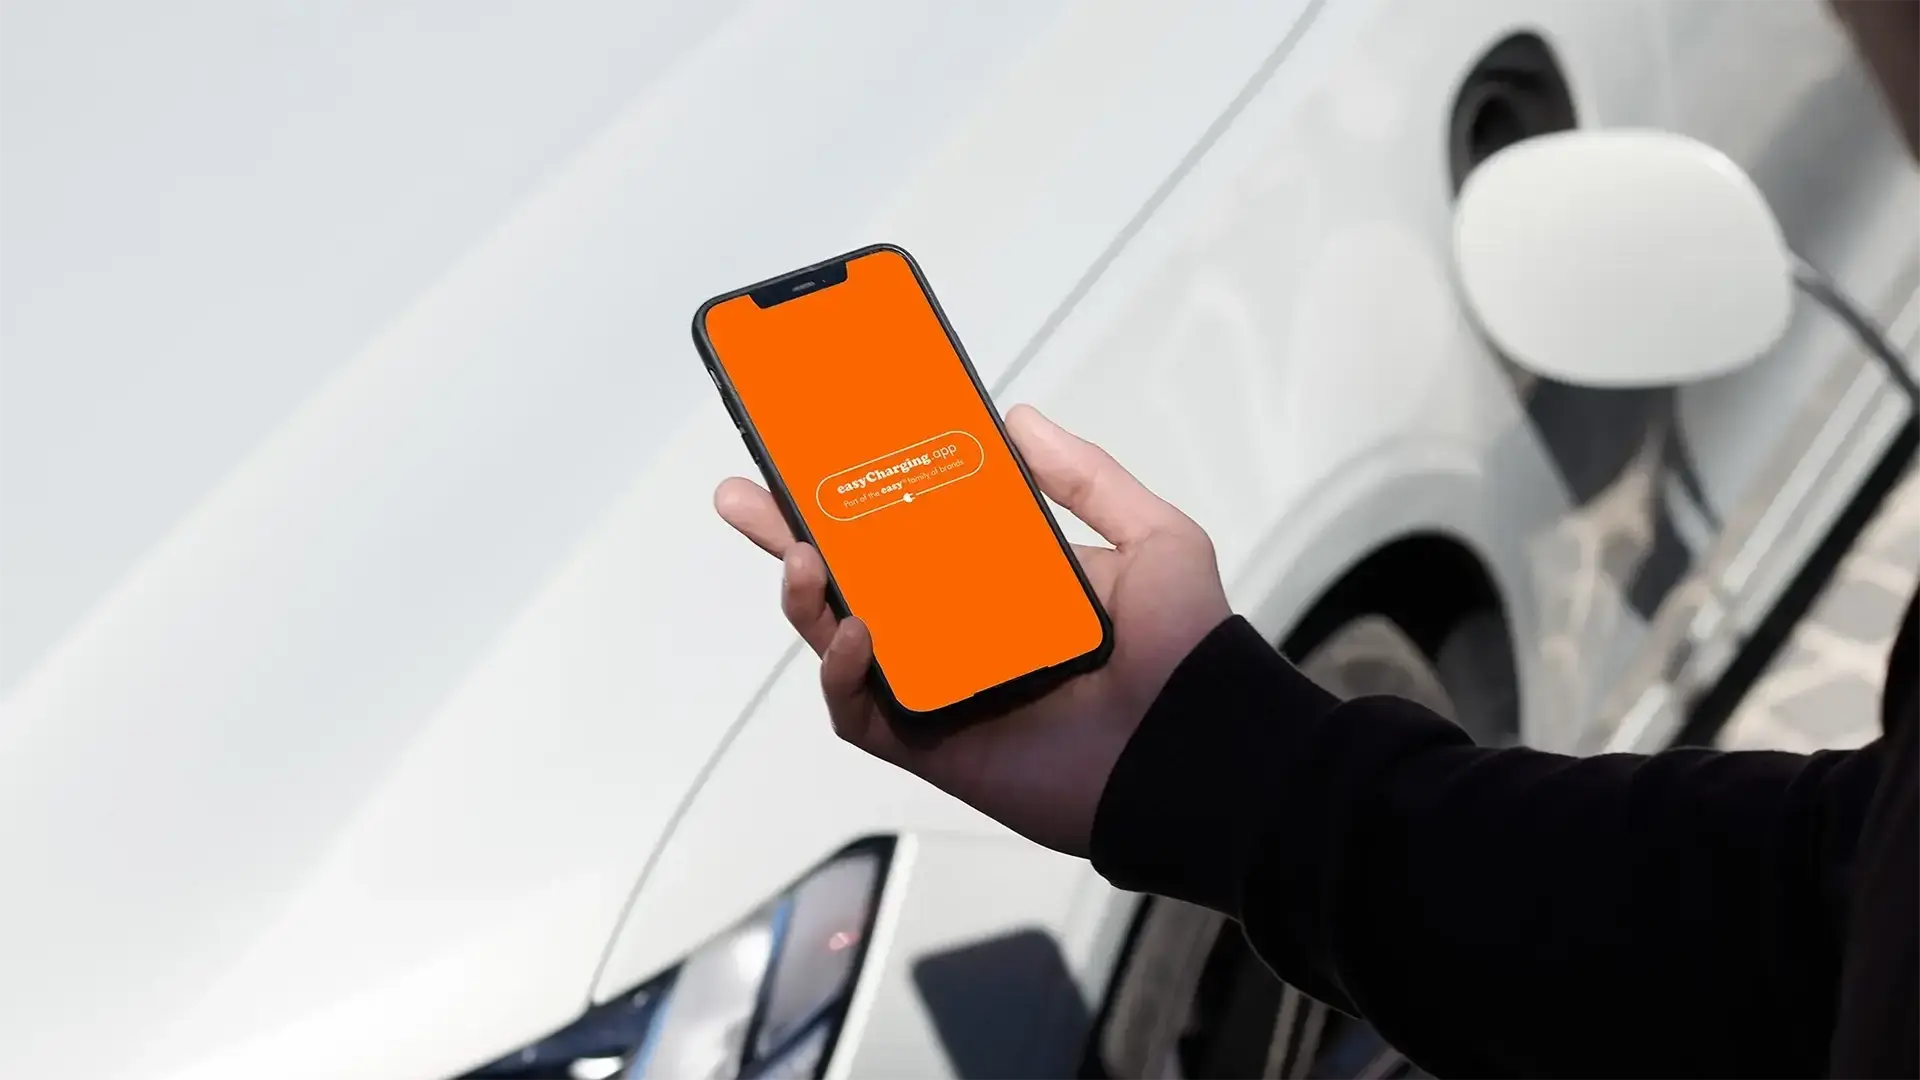 easy-charging-phone-in-hand-in-front-of-white-car